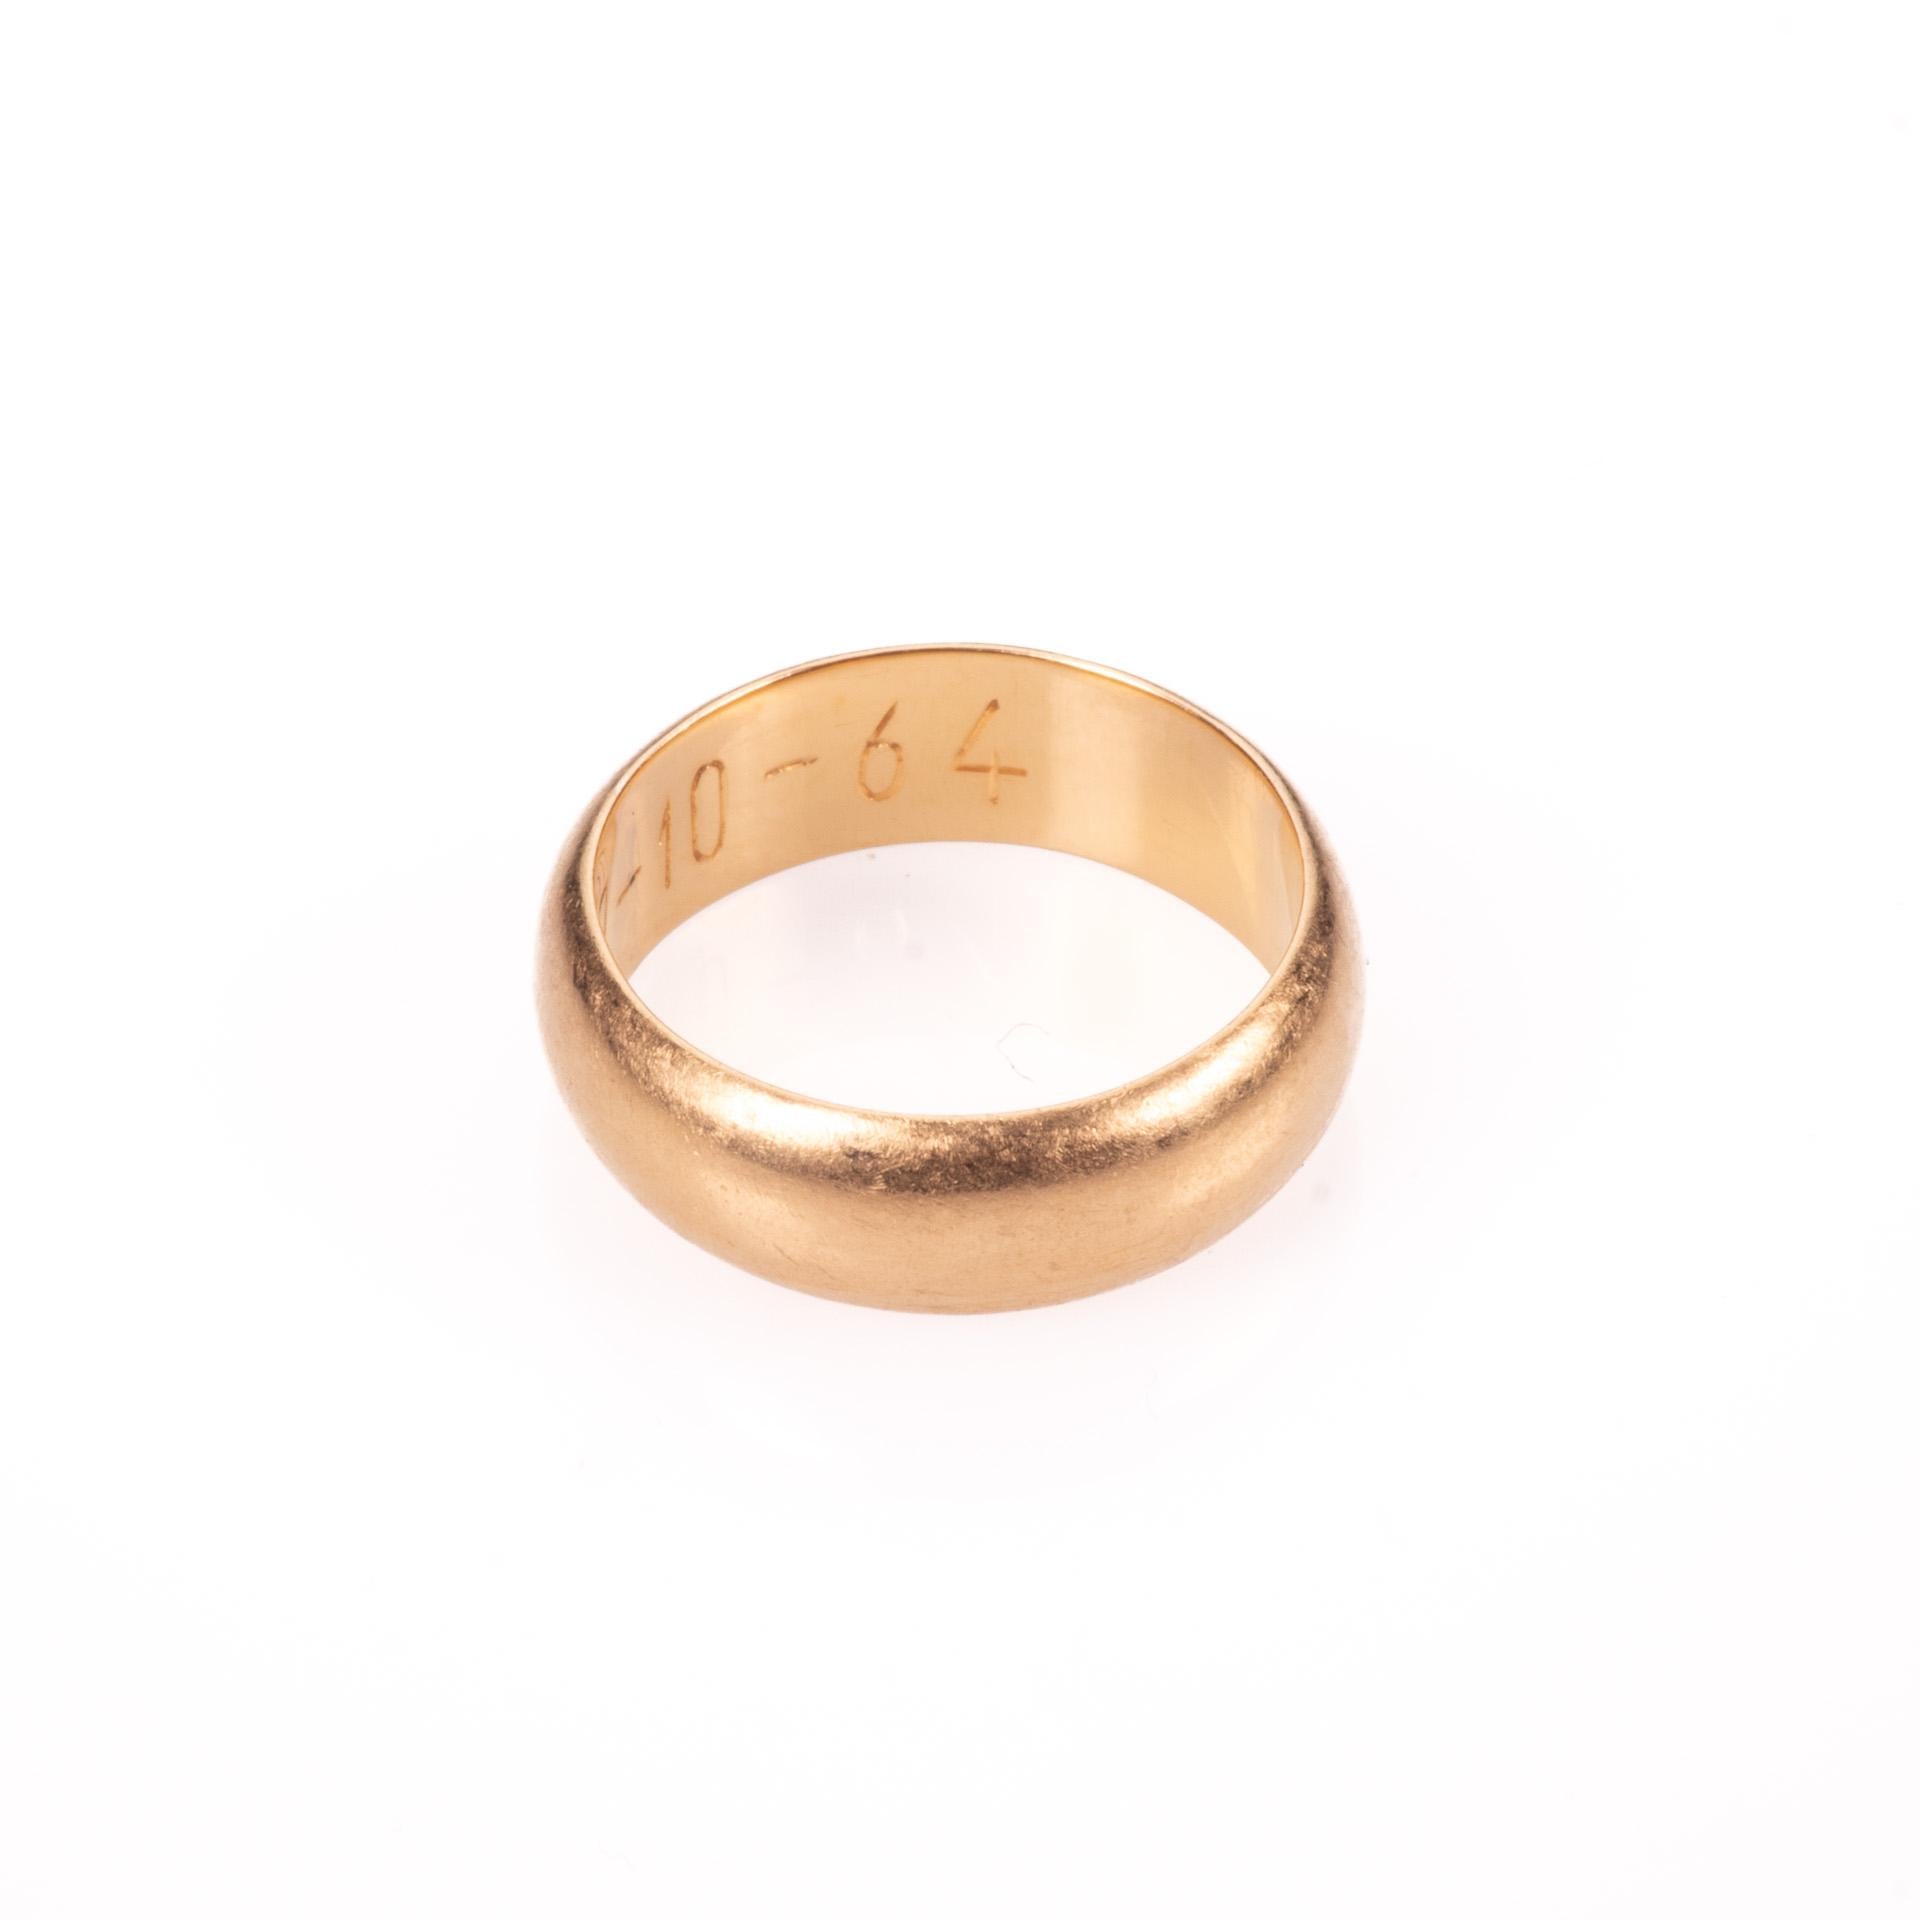 22 Kt Gold Wedding Band Ring
6.28 GRAMS.
Good condition, working.
Free international shipping.